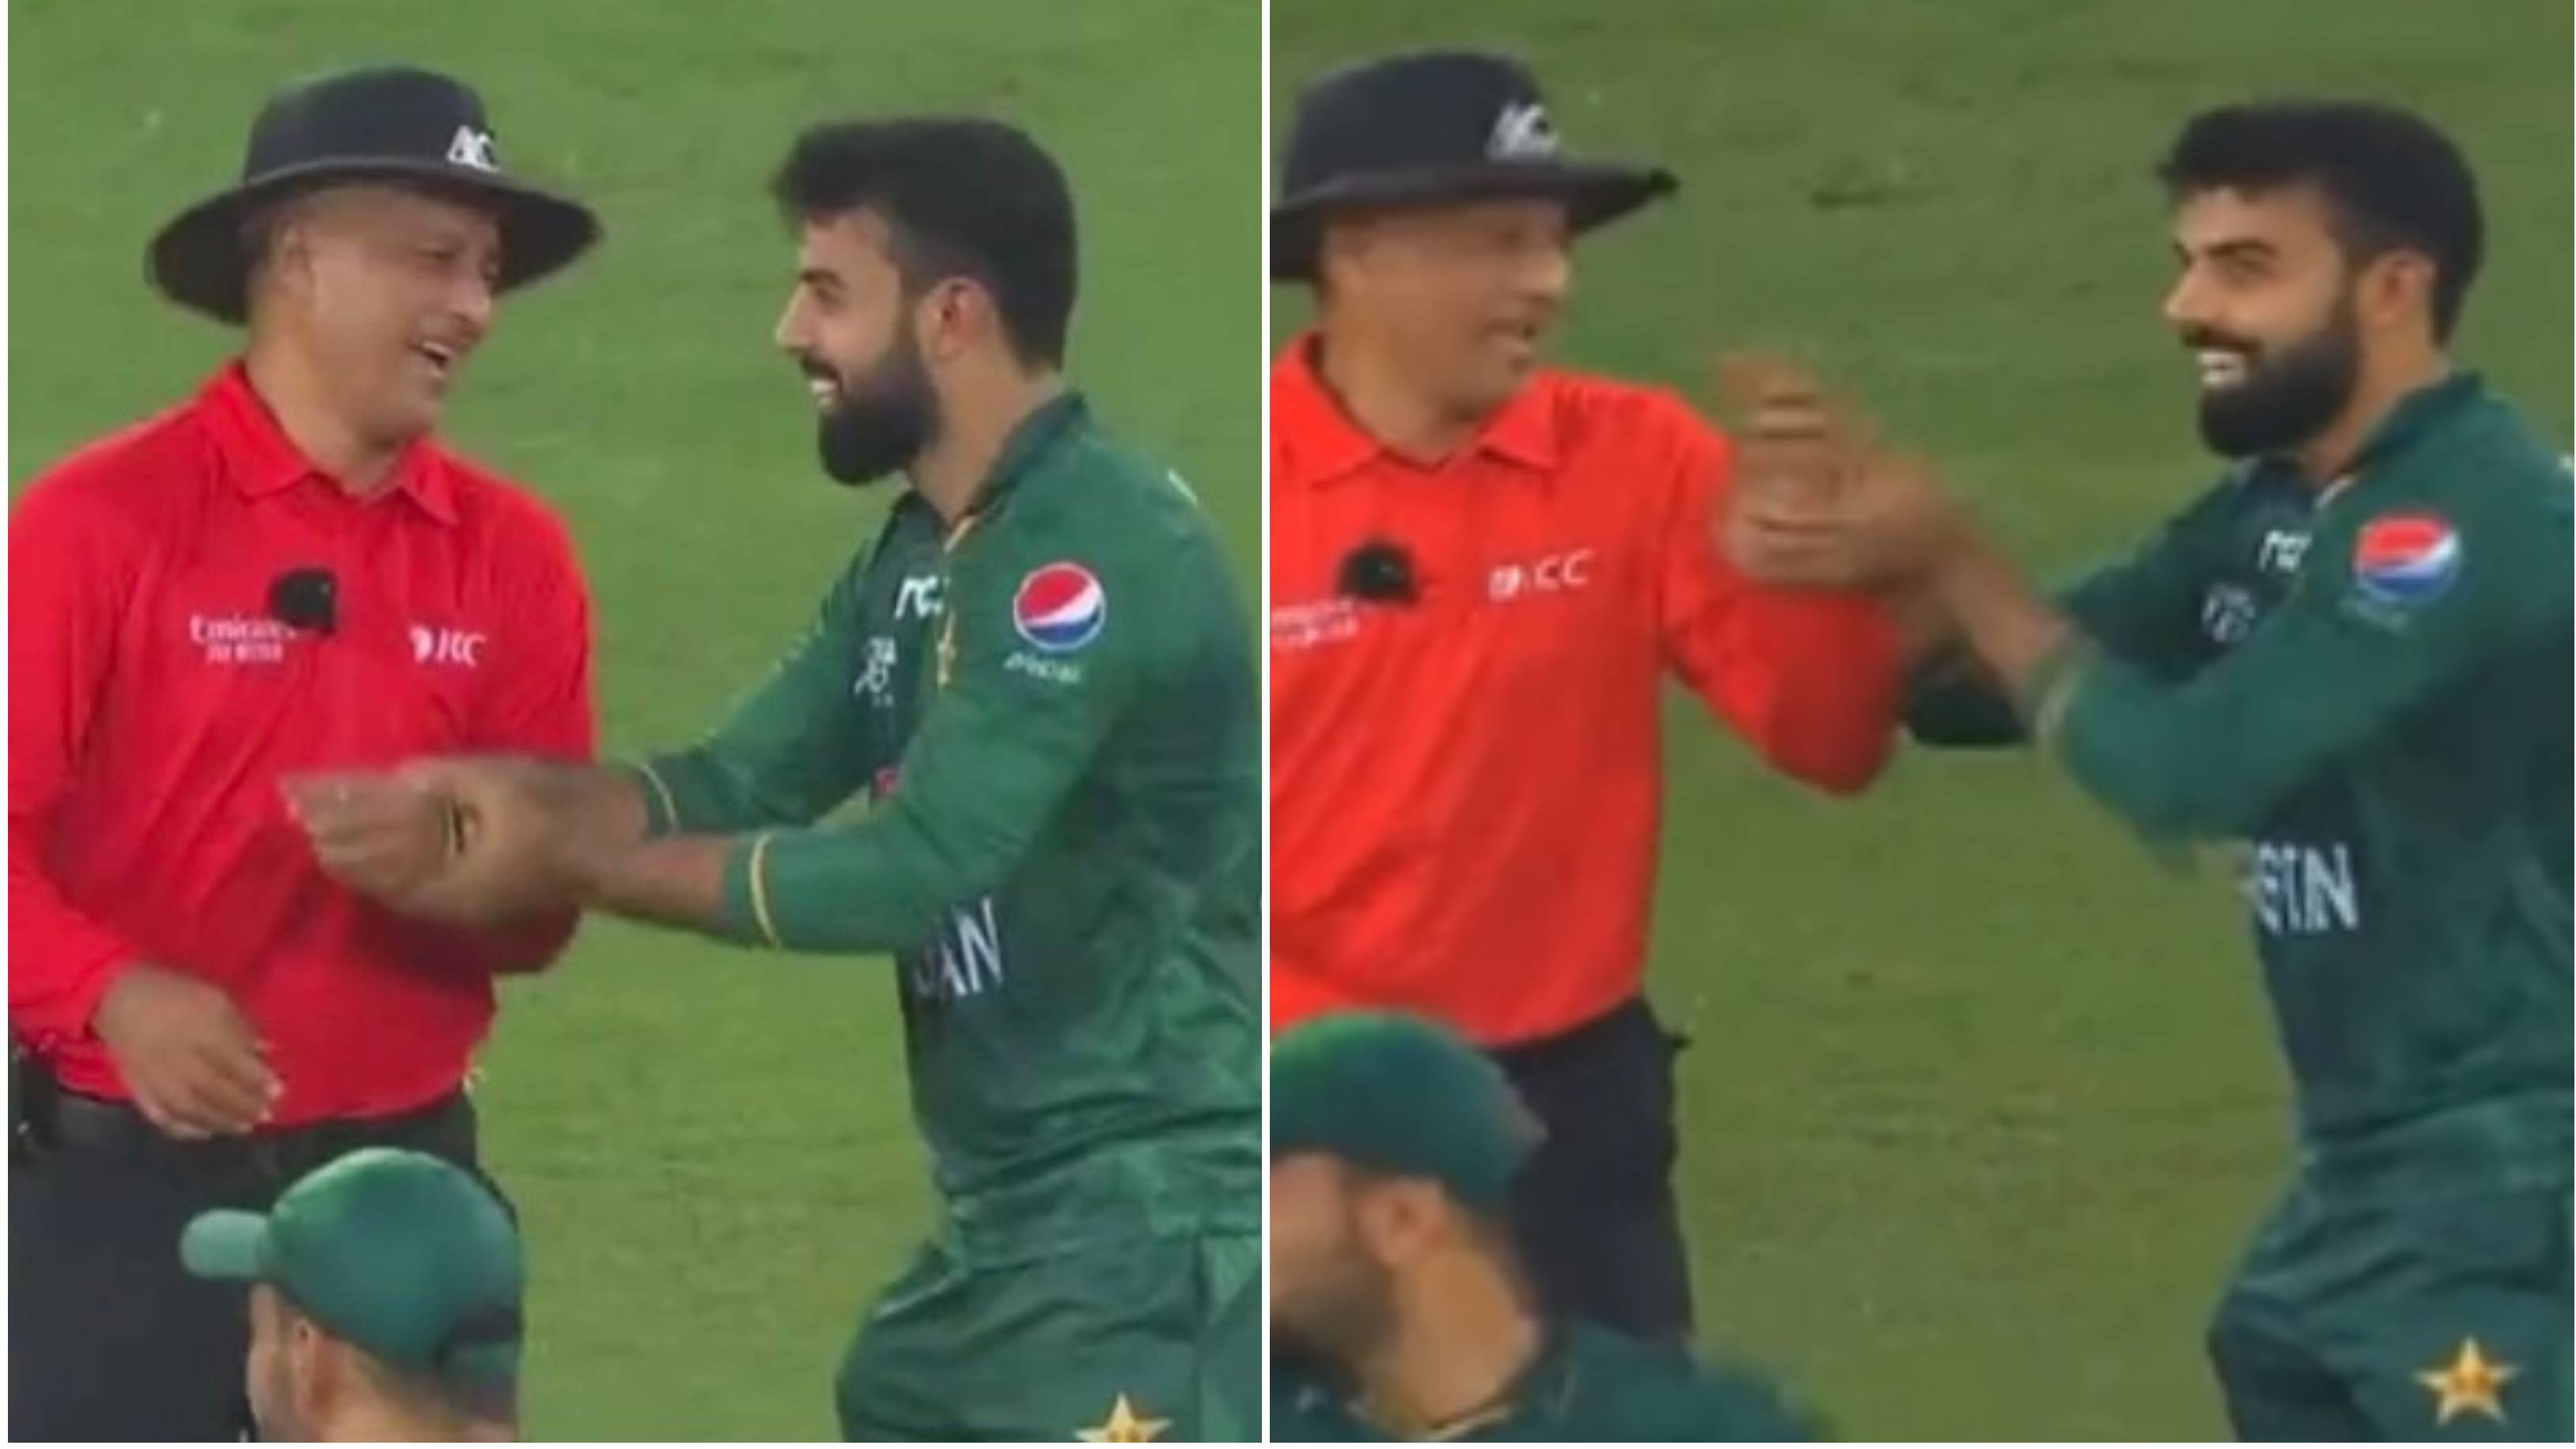 Asia Cup 2022: WATCH – Shadab Khan hilariously raises umpire's finger after DRS rules Bhanuka Rajapaksa not out